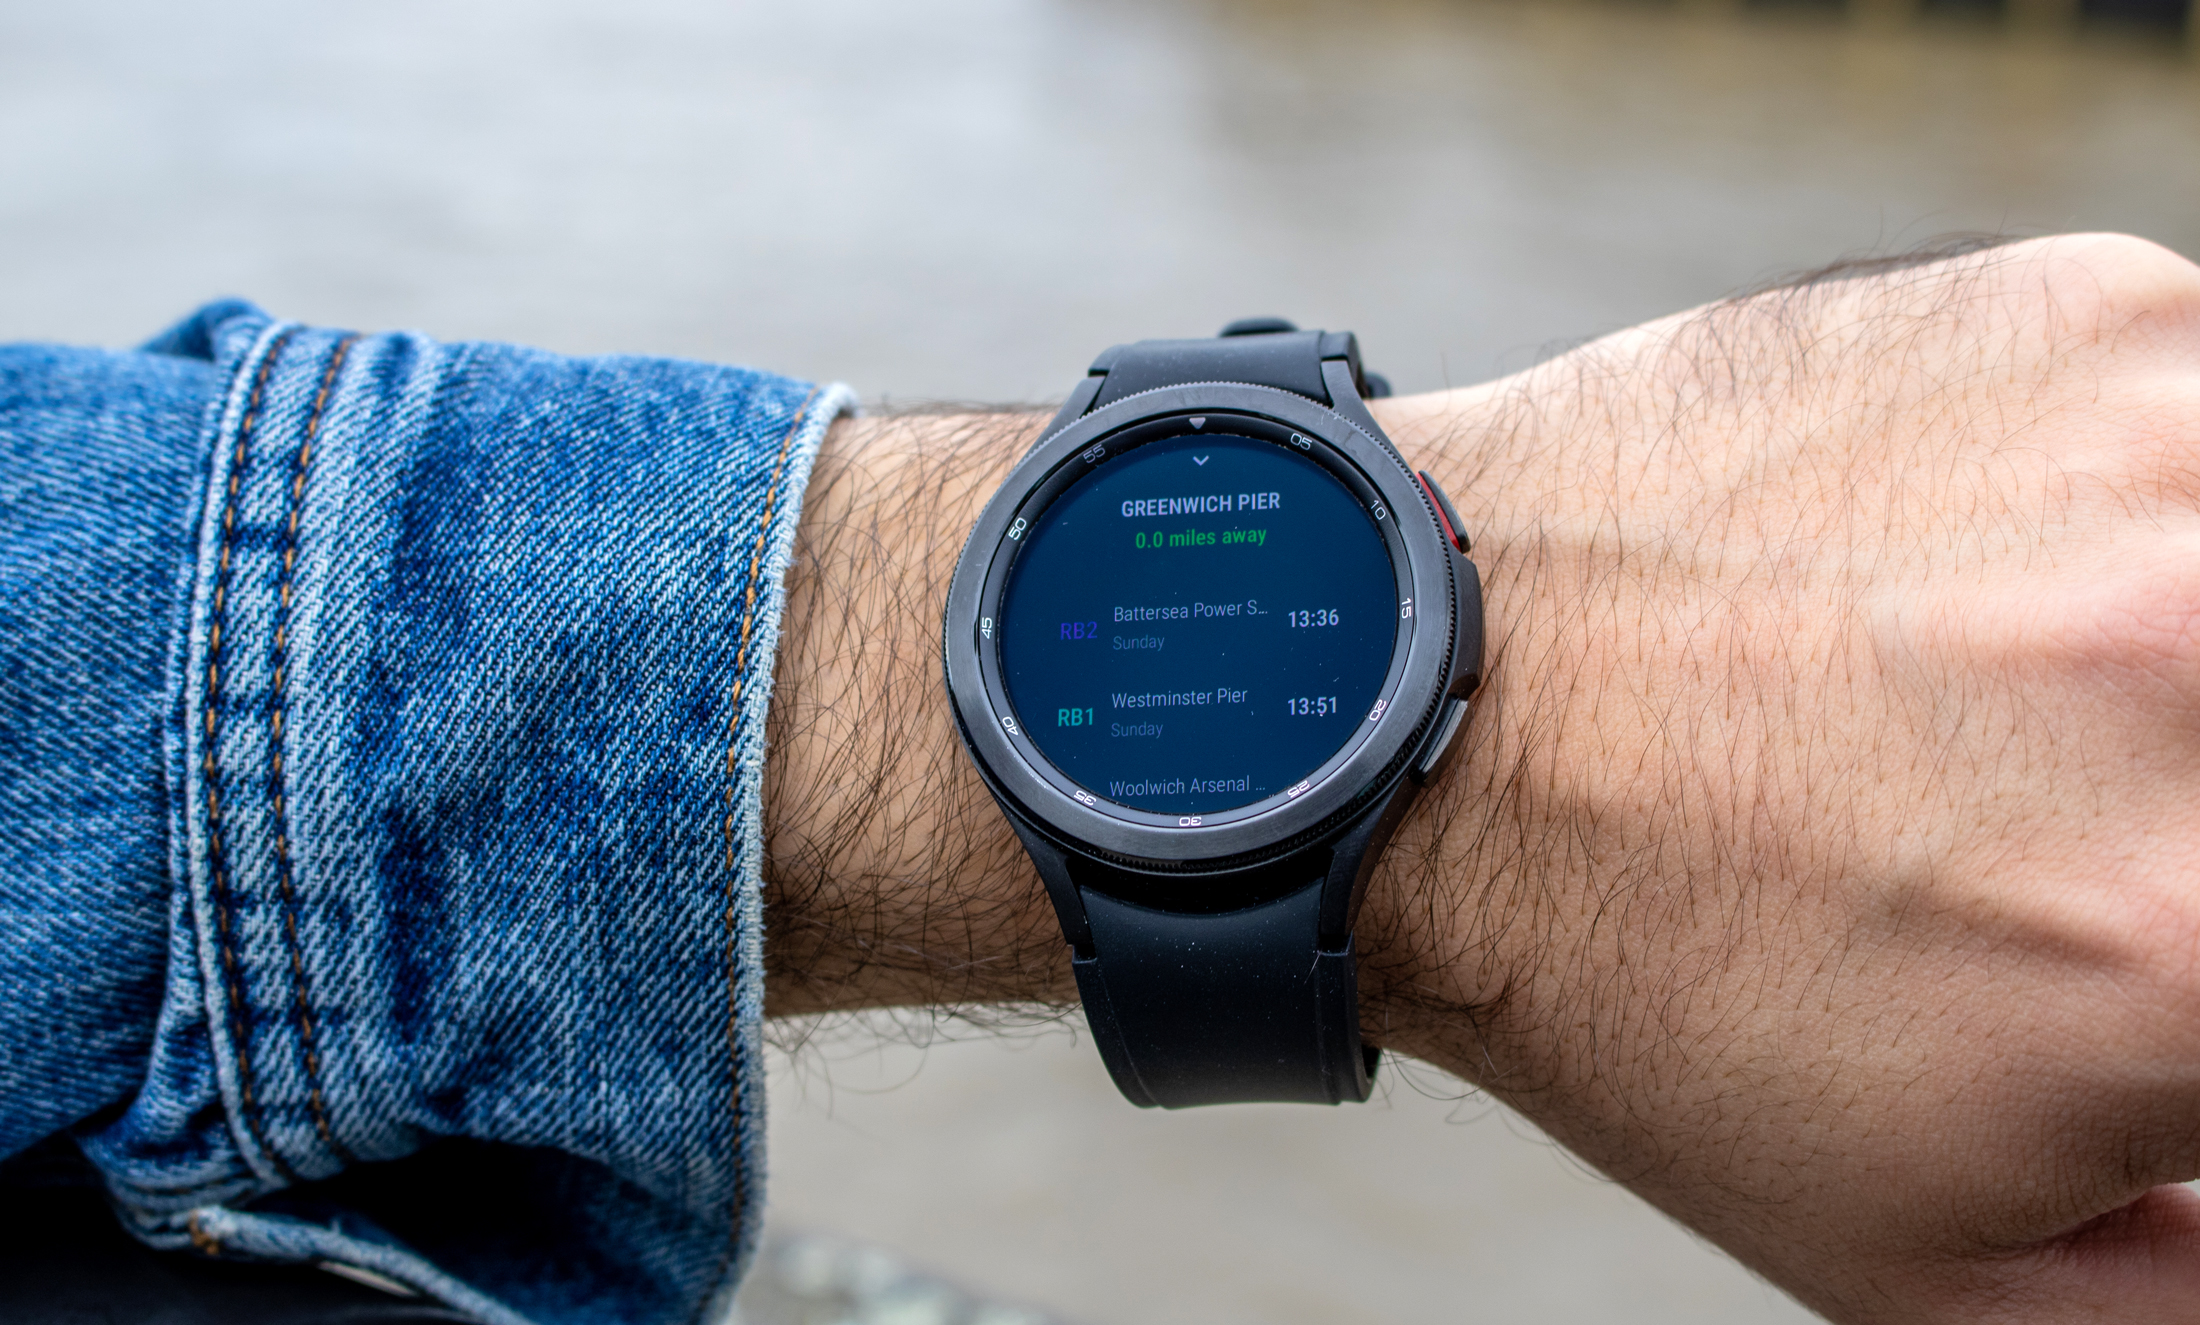 Greenwich Pier timetables – Thames Commuter for Wear OS